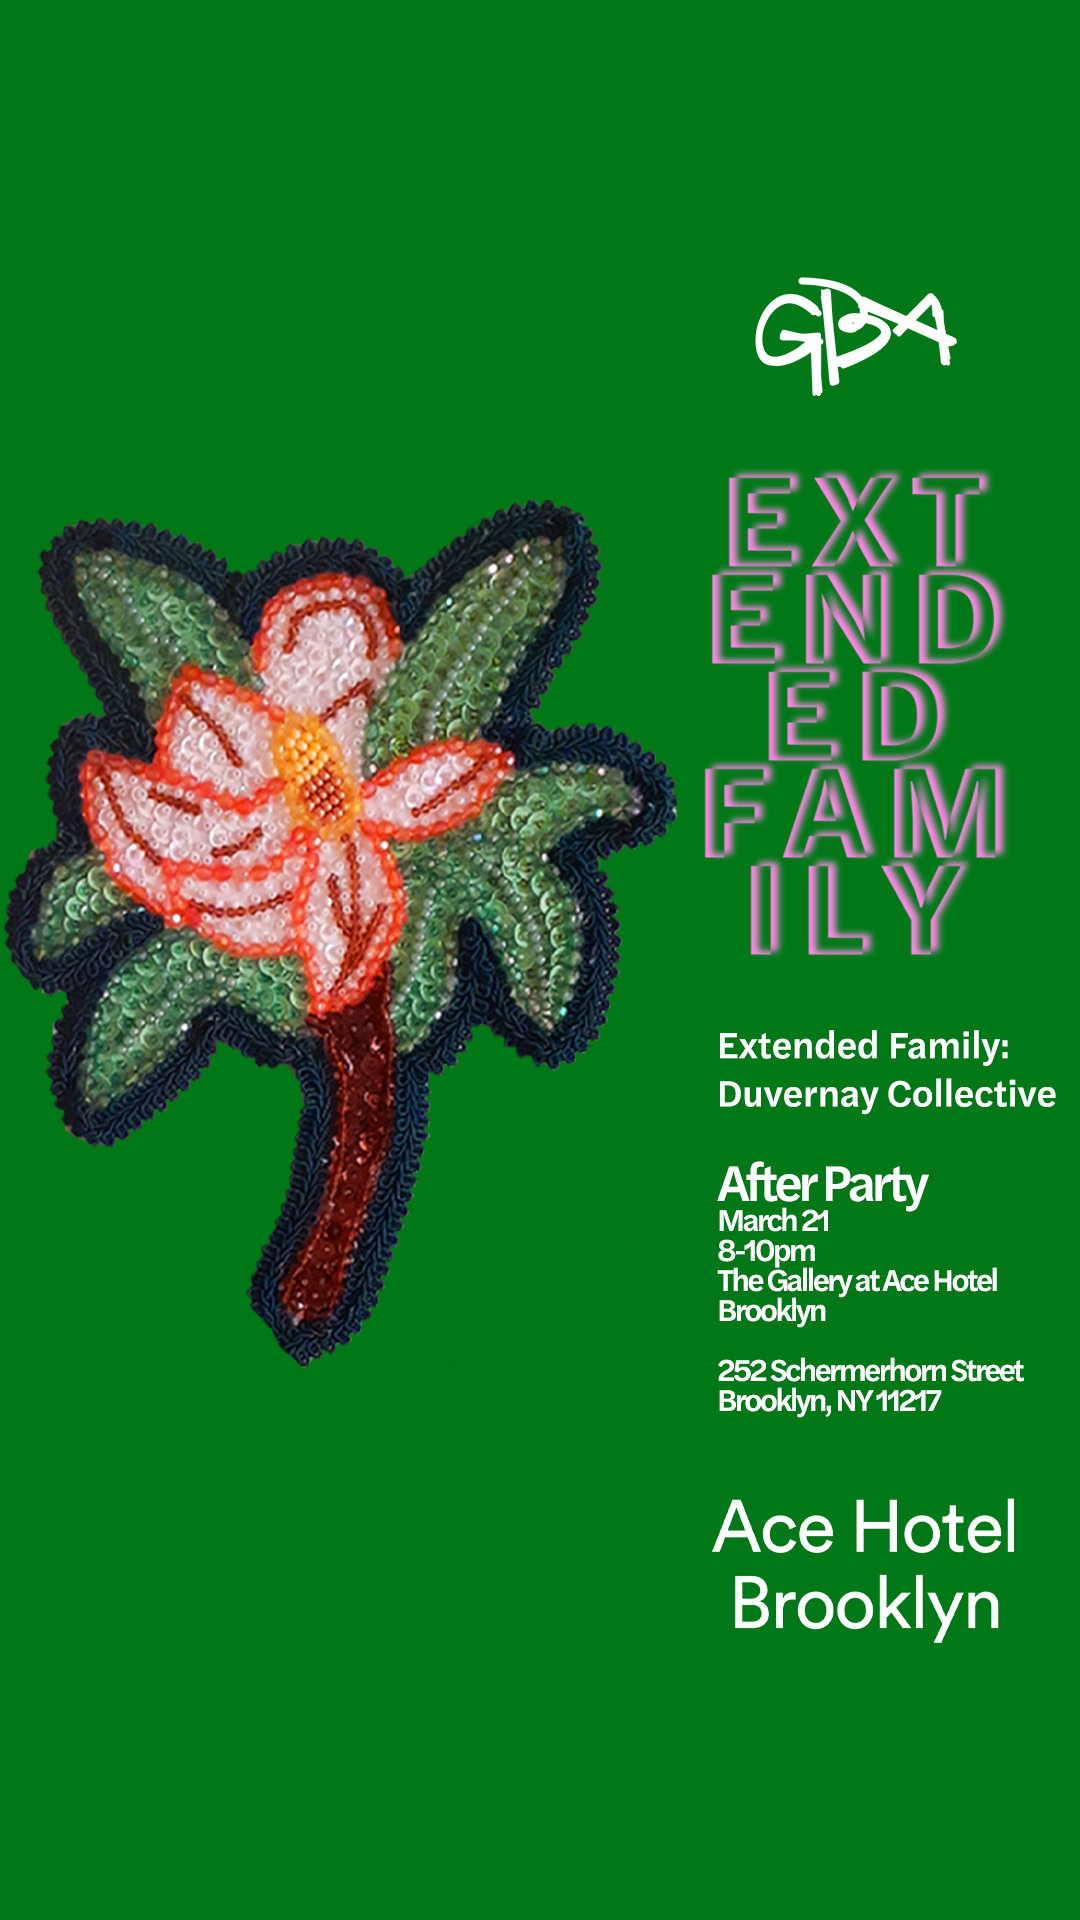 Extended Family event promo - March 21